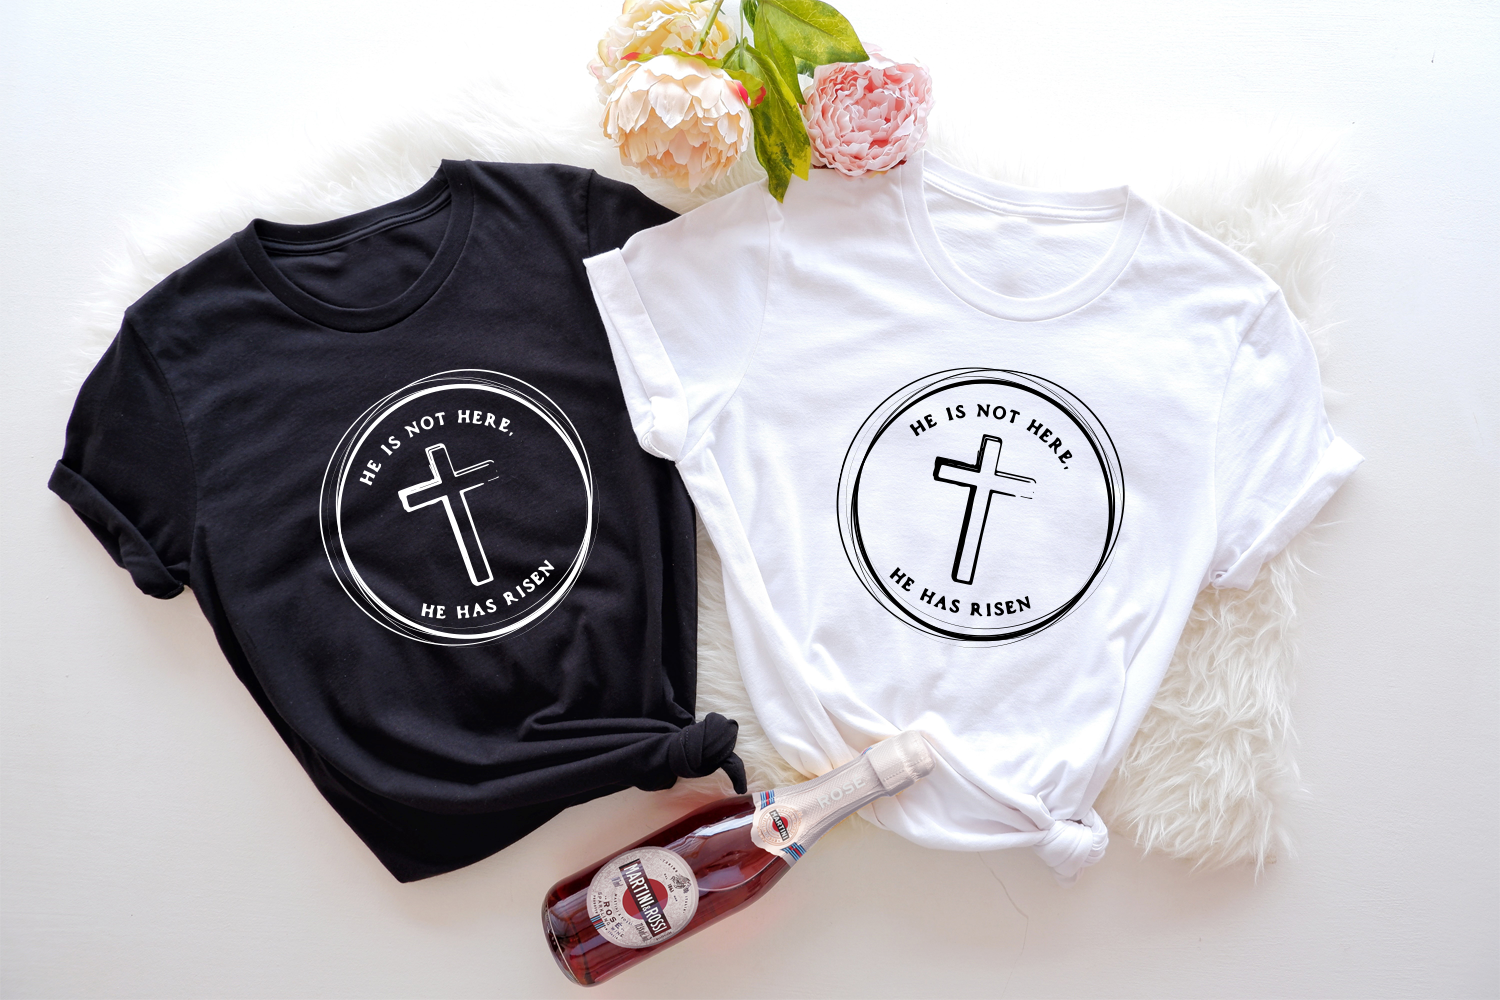 Celebrate Easter with this unique and meaningful "He Is Not Here" Easter shirt.